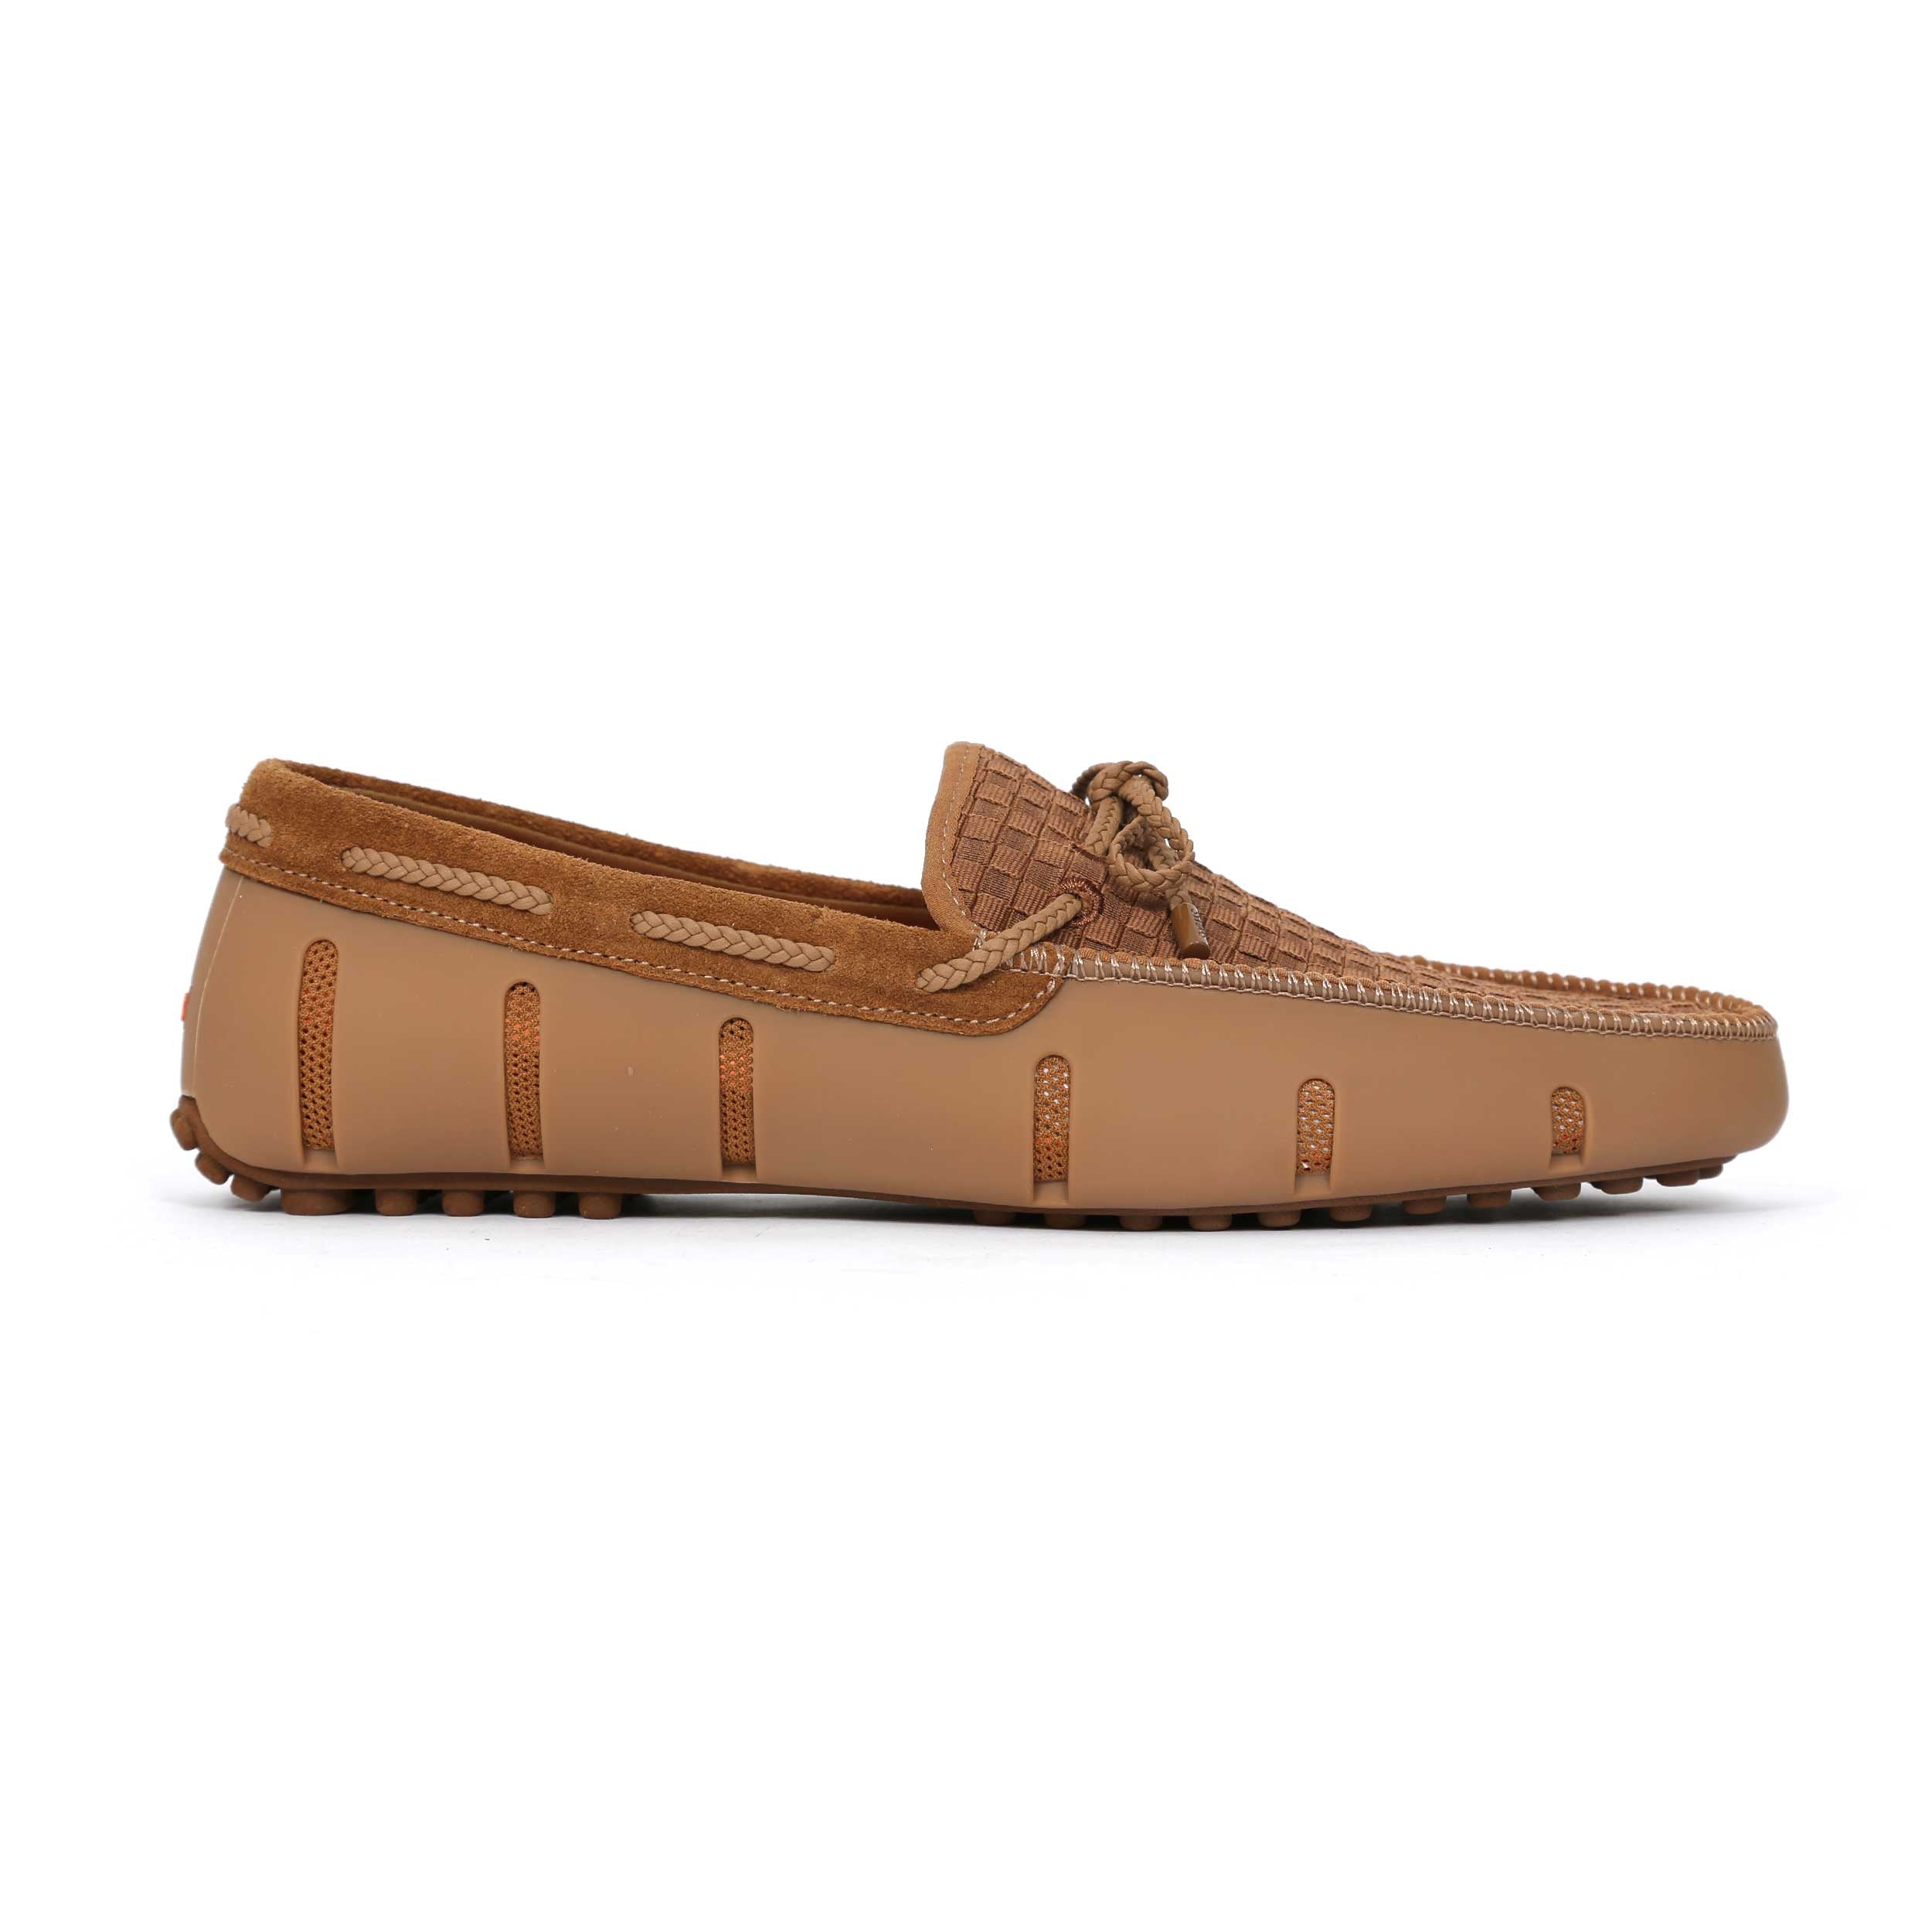 Swims Woven Driver Shoe in Nut